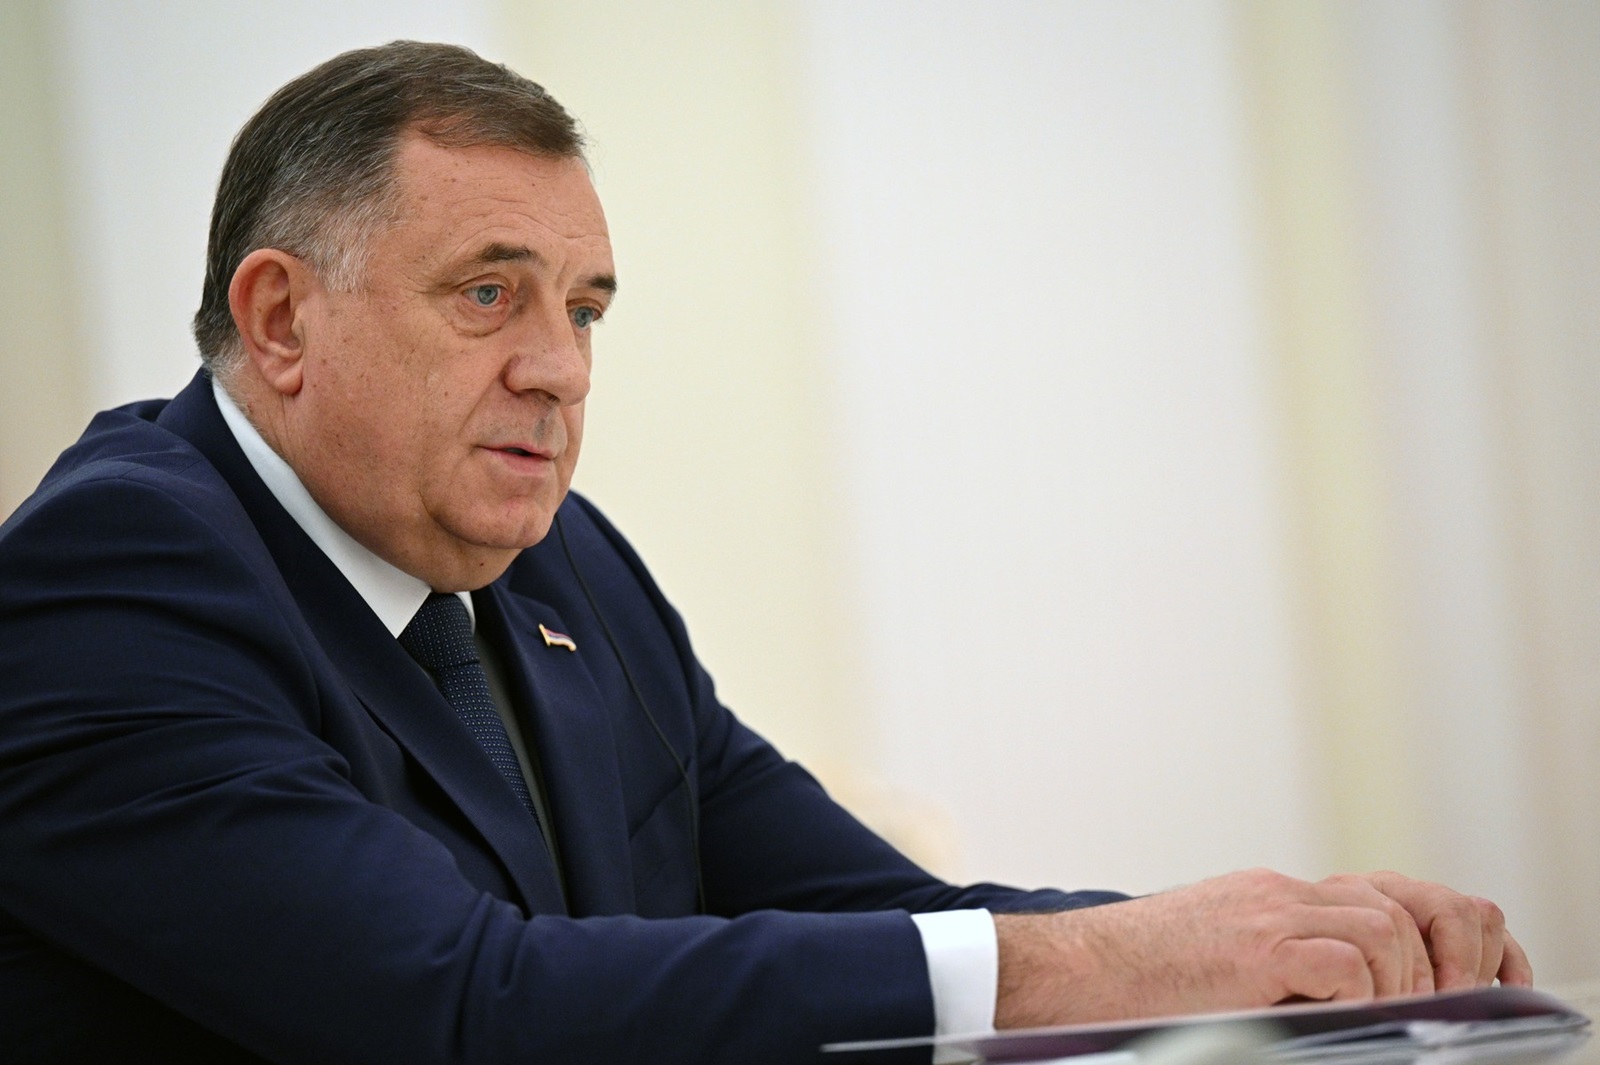 8440769 23.05.2023 President of Republika Srpska Milorad Dodik attends a meeting with Russian President Vladimir Putin at the Kremlin in Moscow, Russia.,Image: 778577491, License: Rights-managed, Restrictions: Editors' note: THIS IMAGE IS PROVIDED BY RUSSIAN STATE-OWNED AGENCY SPUTNIK., Model Release: no, Credit line: Alexey Filippov / Sputnik / Profimedia